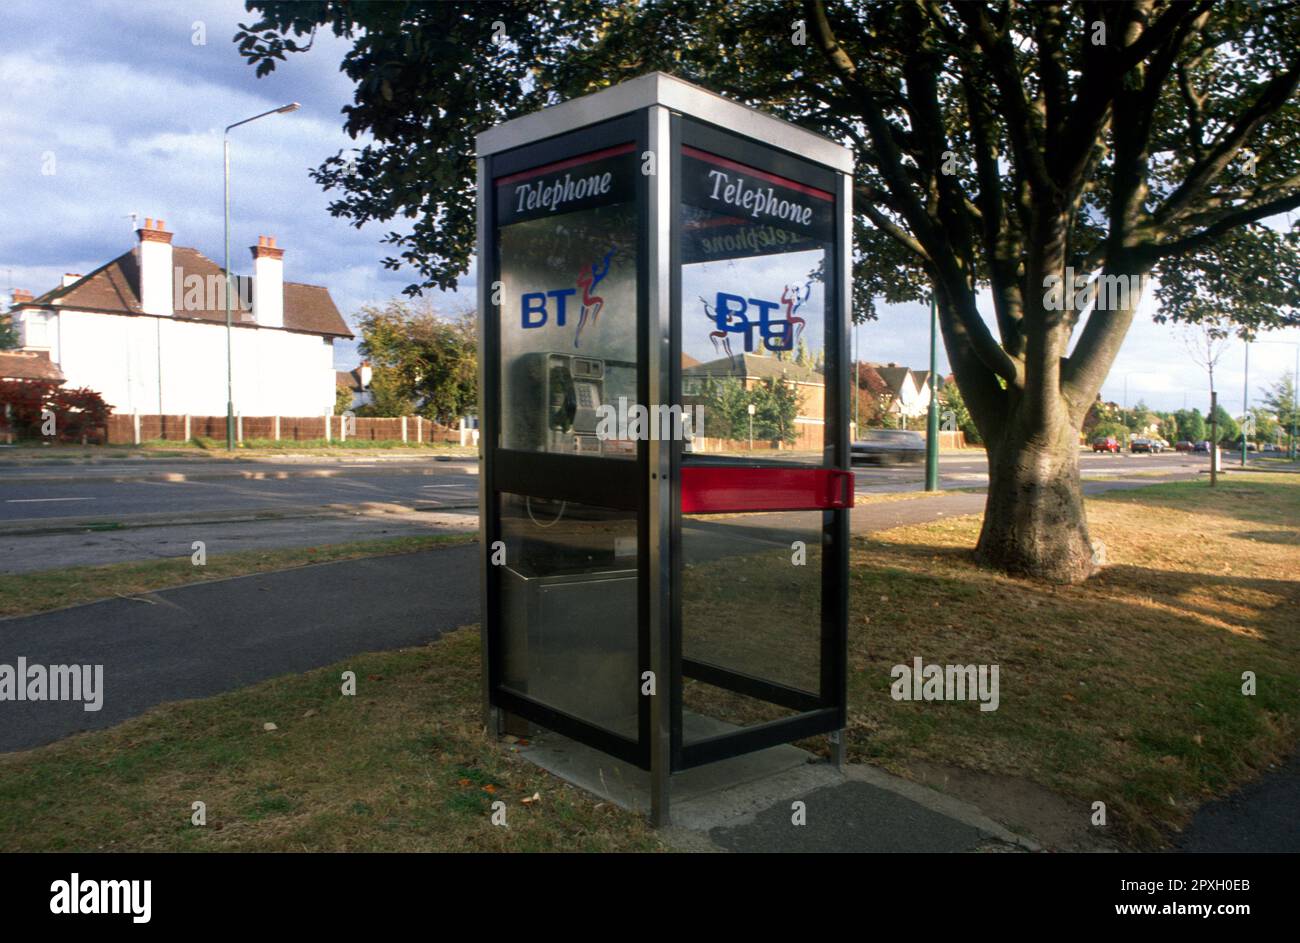 British Telecom (BT) Telephone Box on the Side of the Road Surrey England Stock Photo